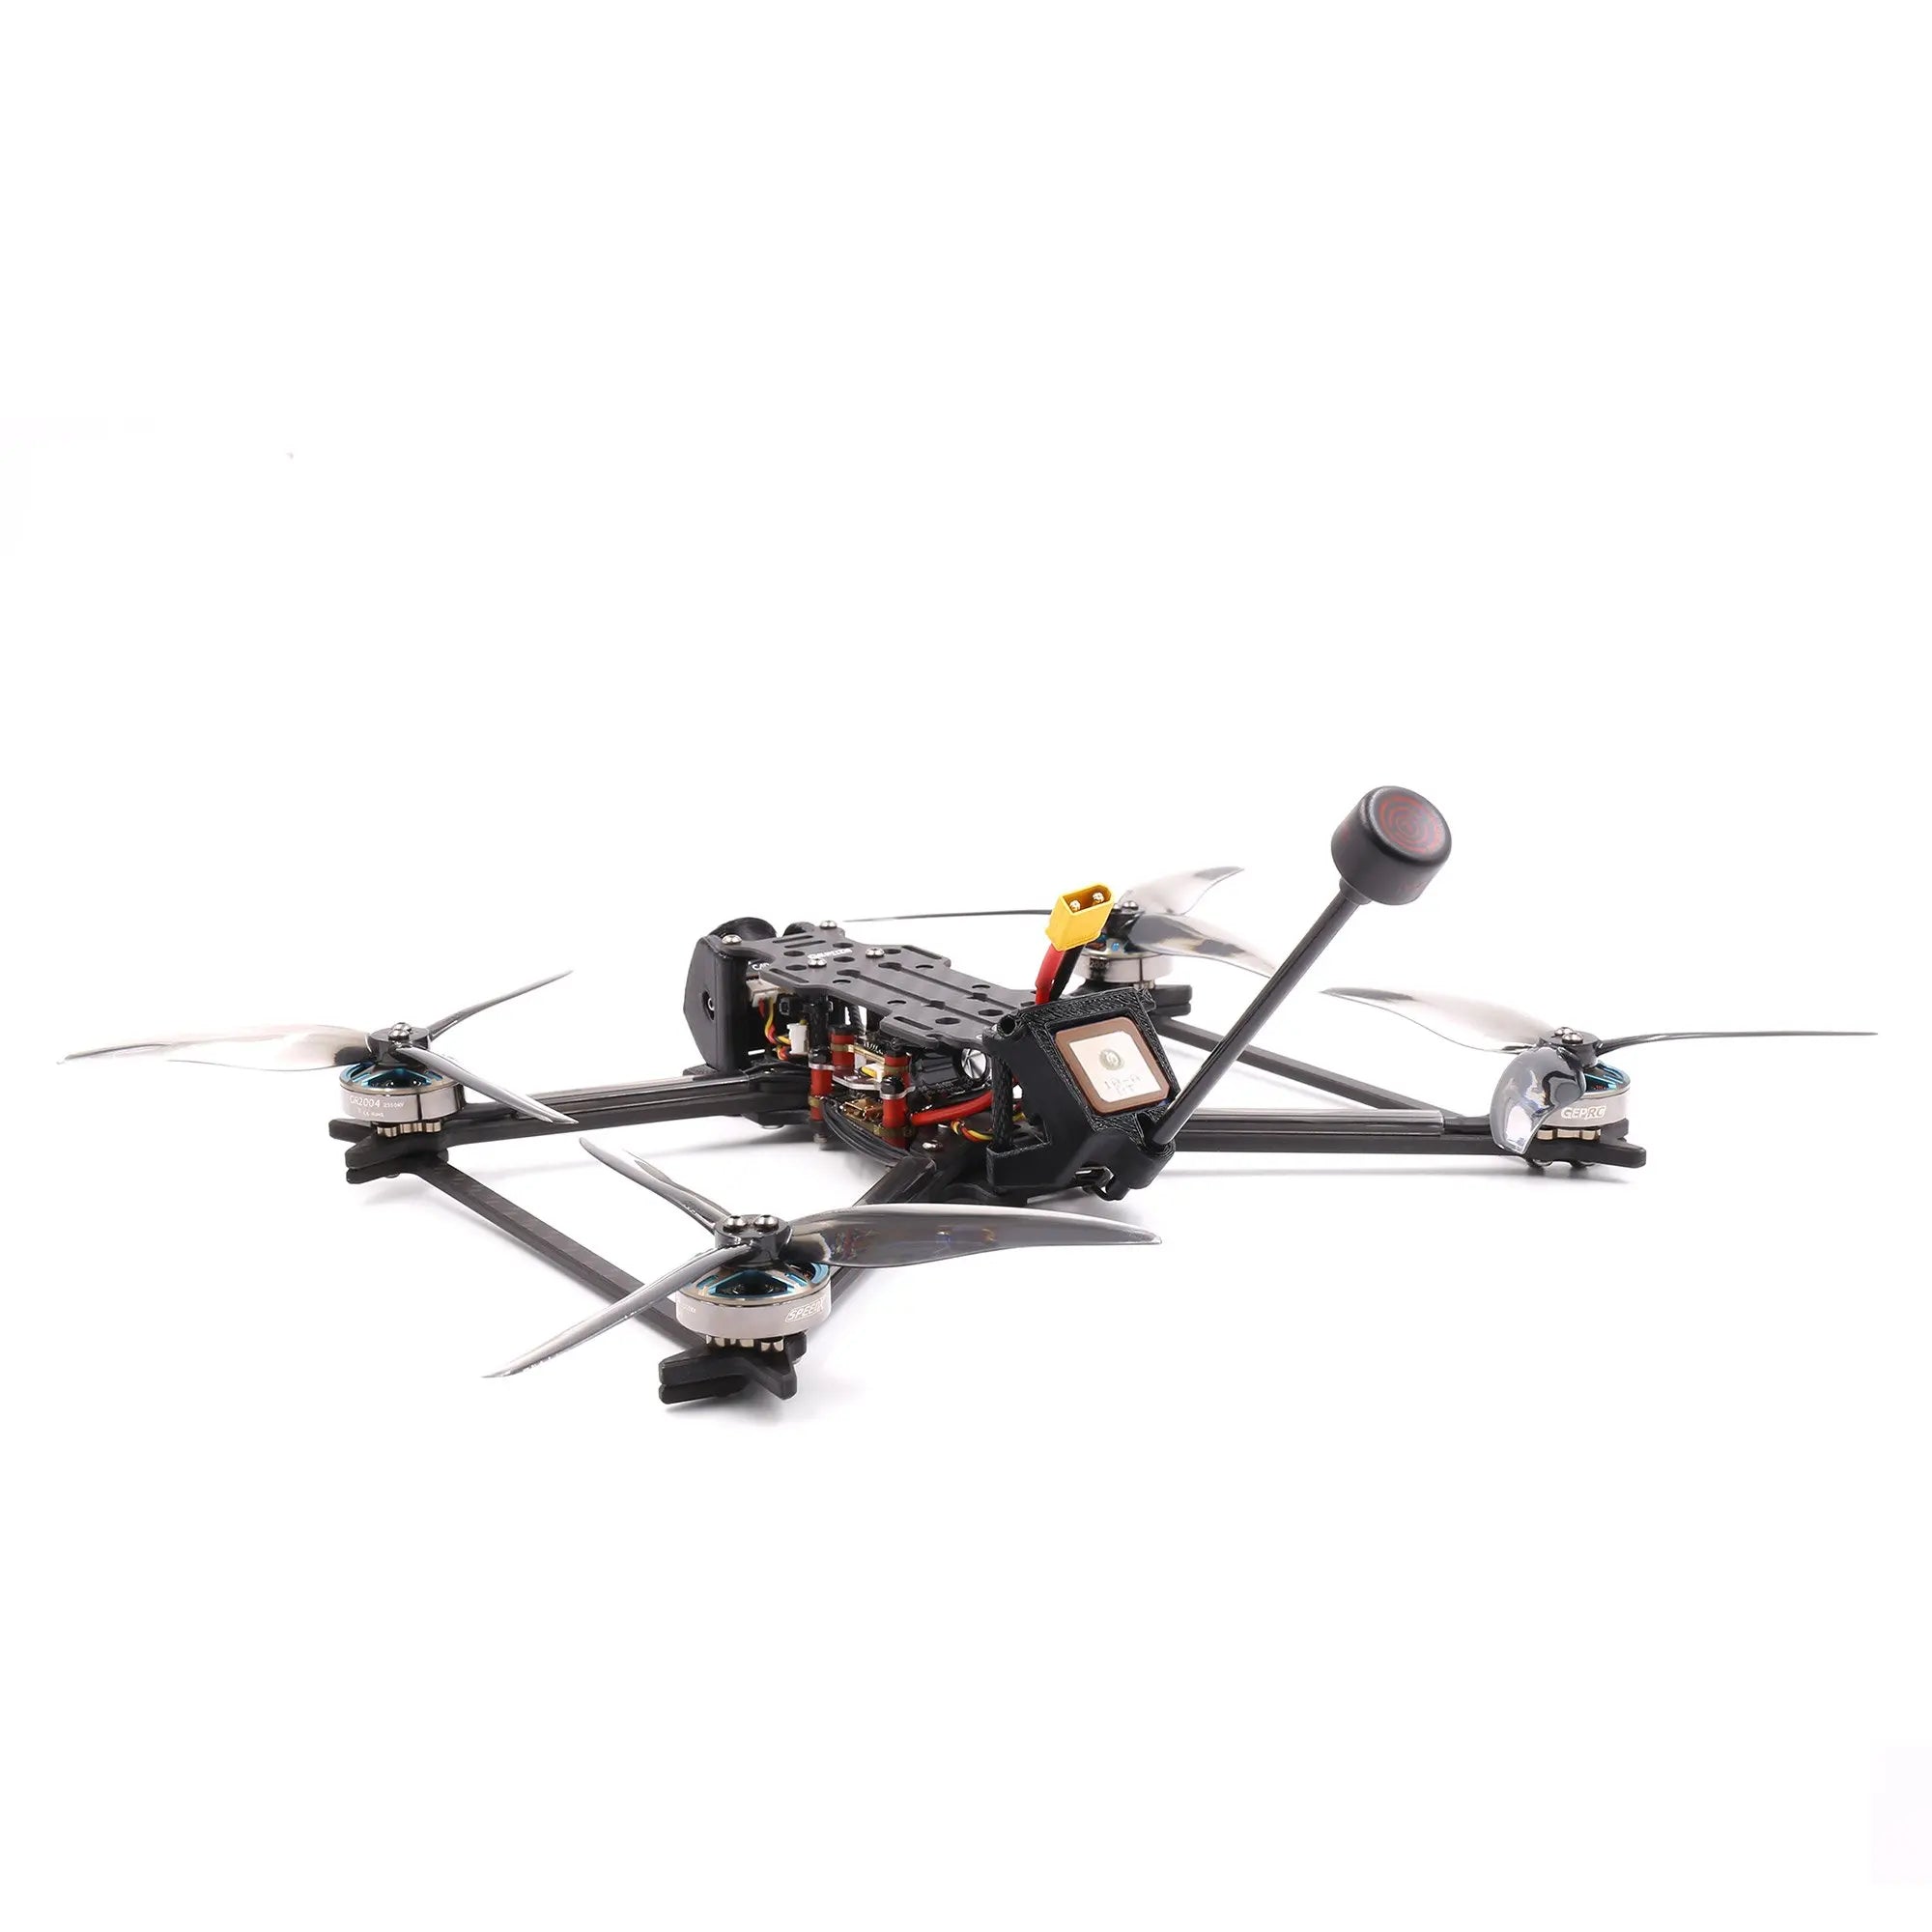 GEPRC Crocodile5 Baby FPV Drone, if equipped with GEPRC VTC6 18650 4S1P 3000mAh